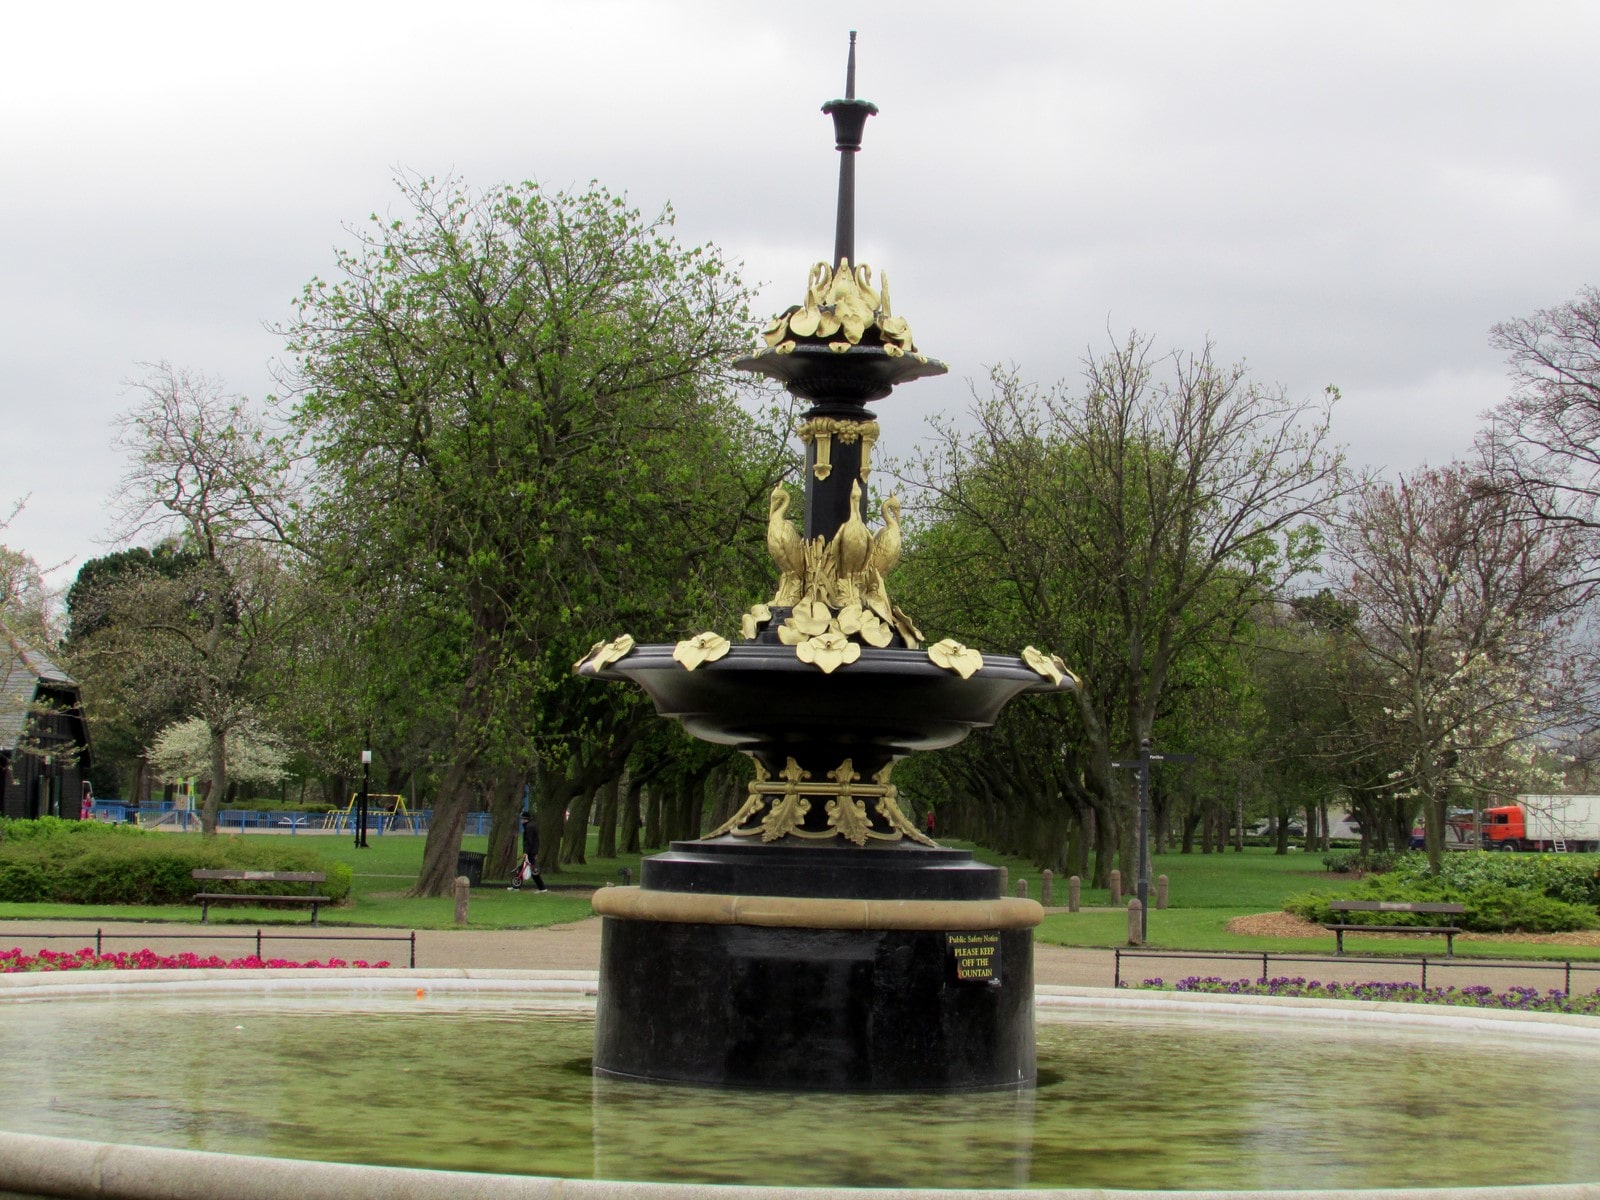 Albert Park, Middlesbrough. The Park opened in 1868